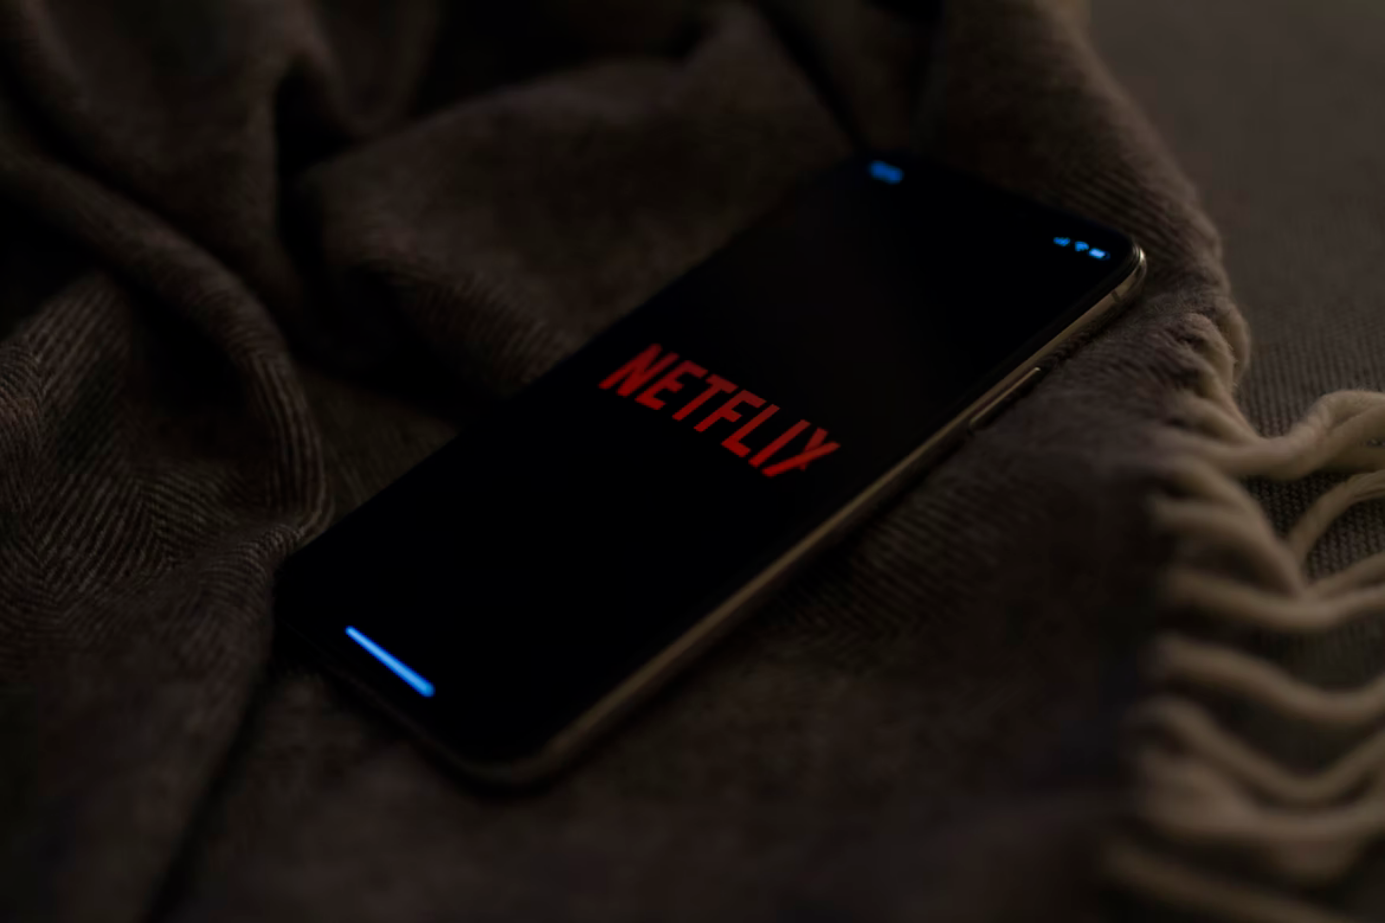 How to sign out of Netflix on an Android device